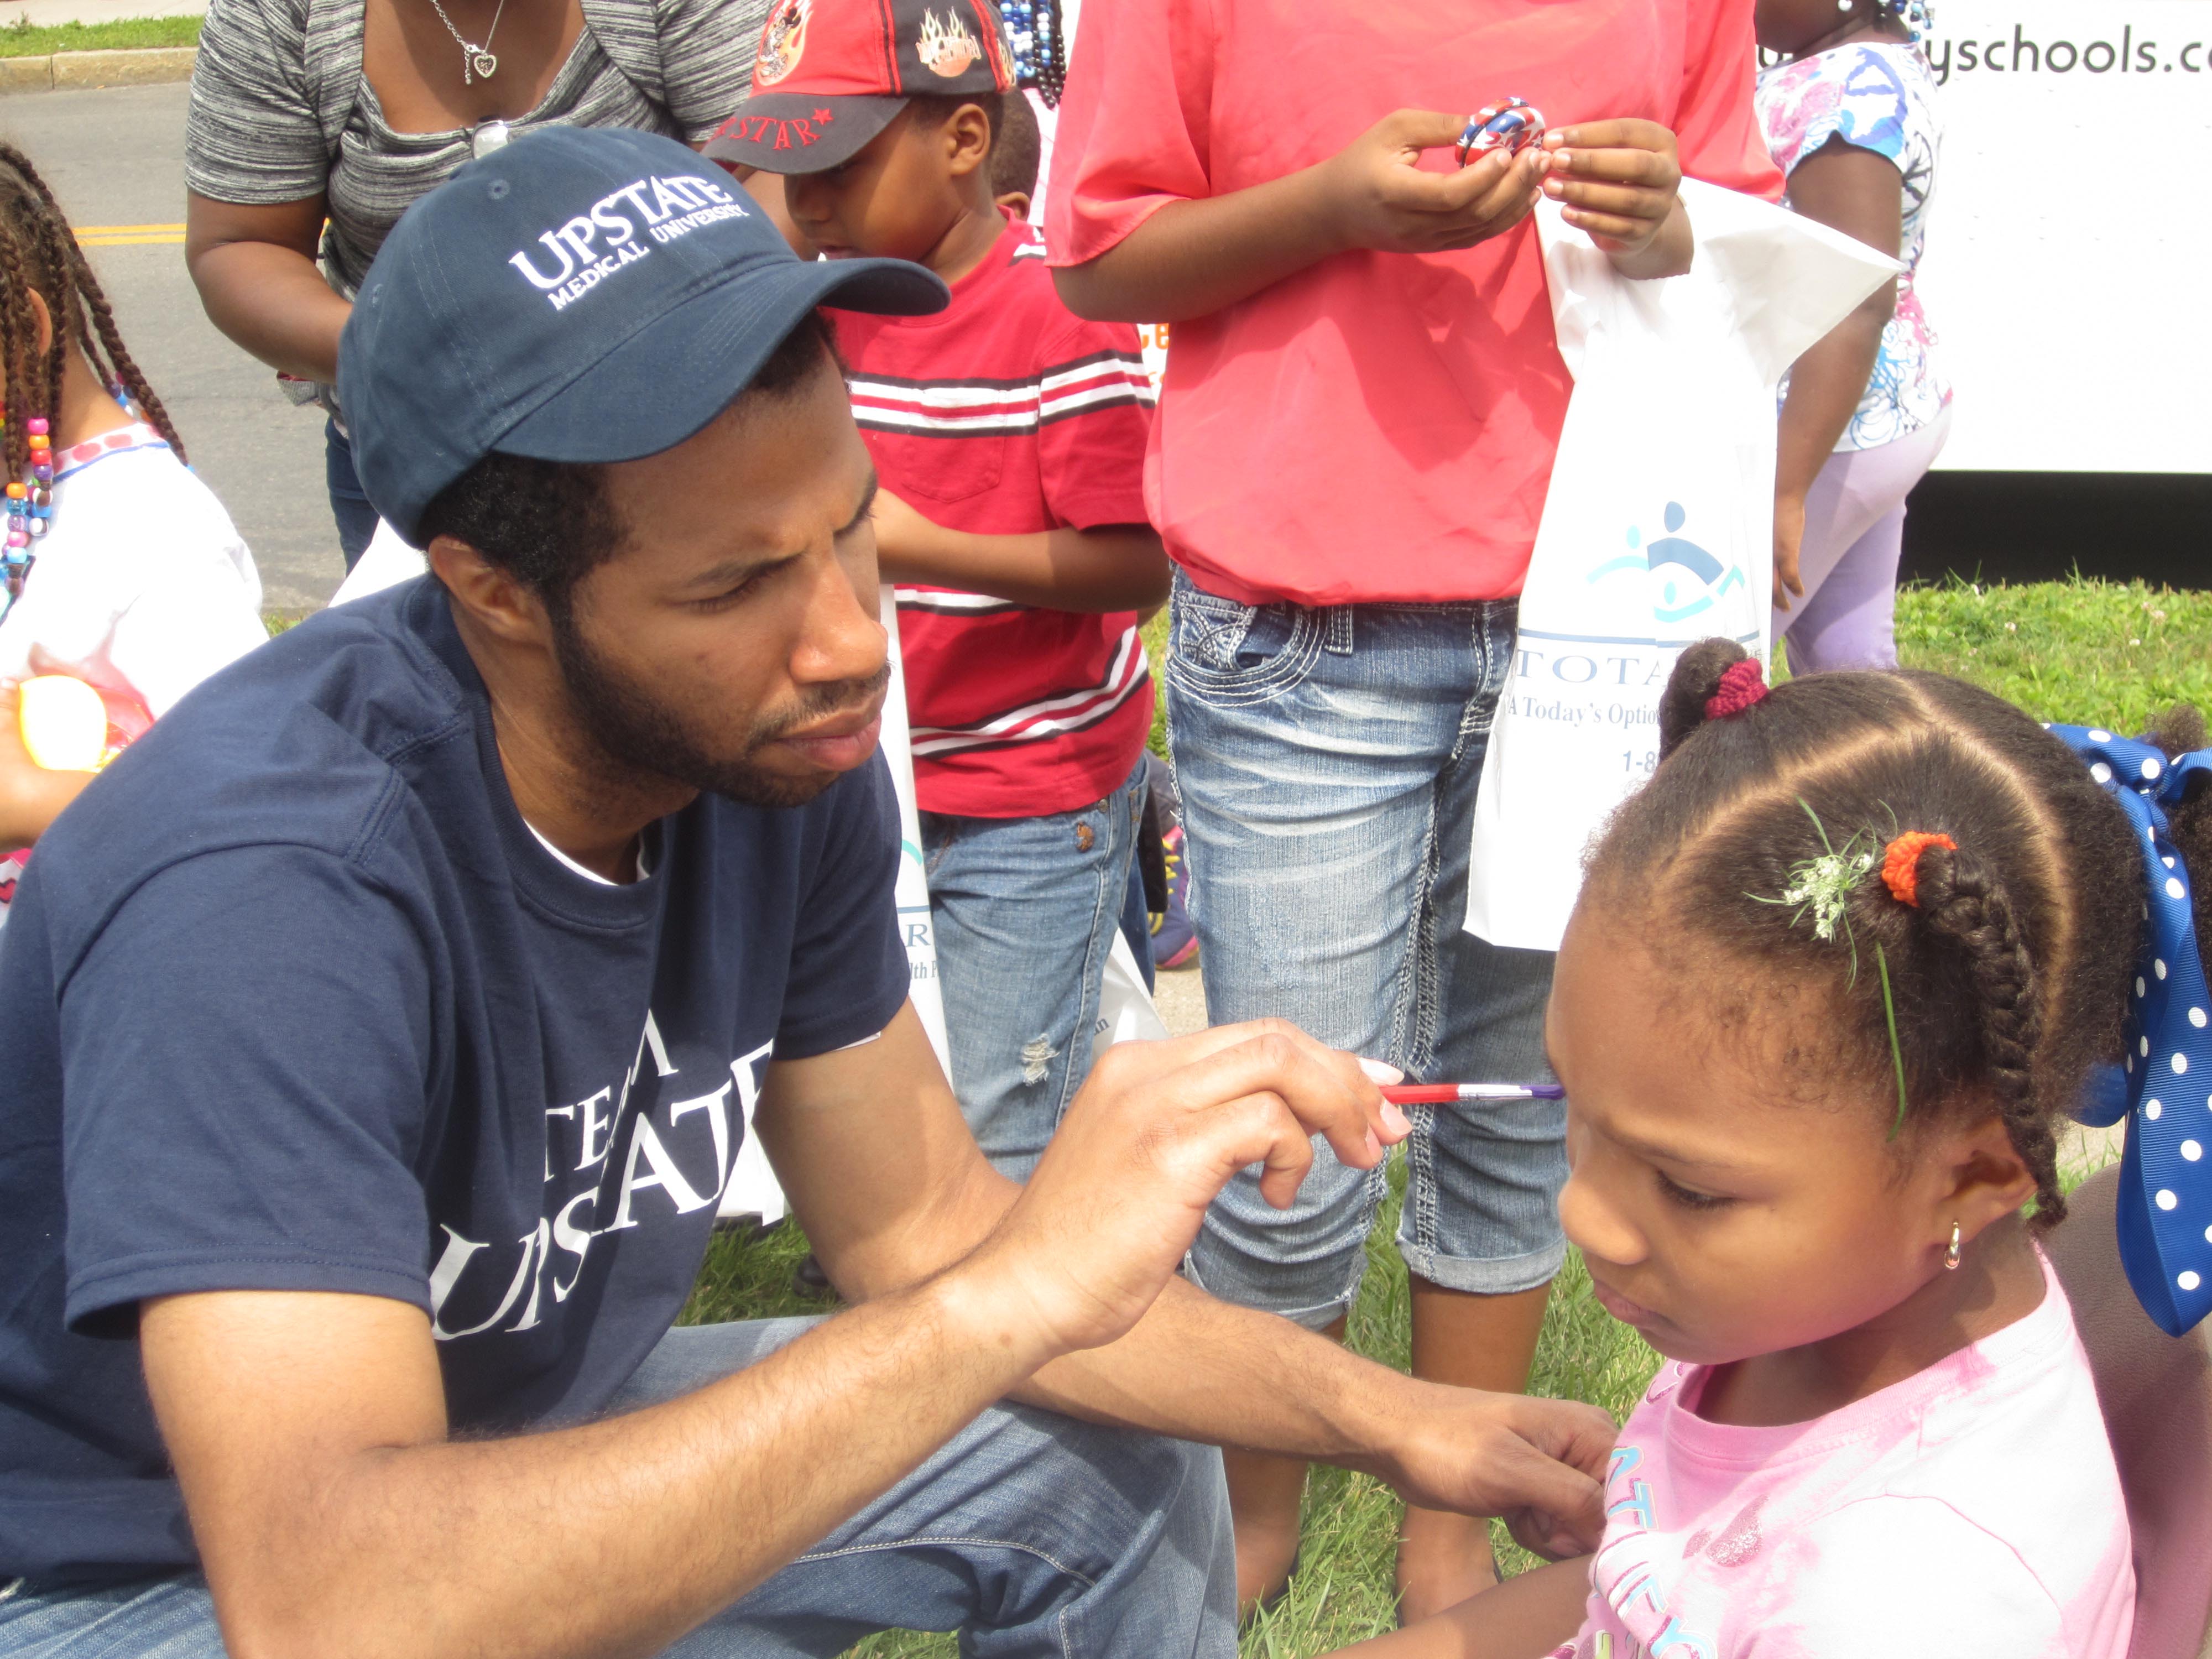 Medical student Alex Rodriguez paints the face of a young student at the Back To School Barbeque.